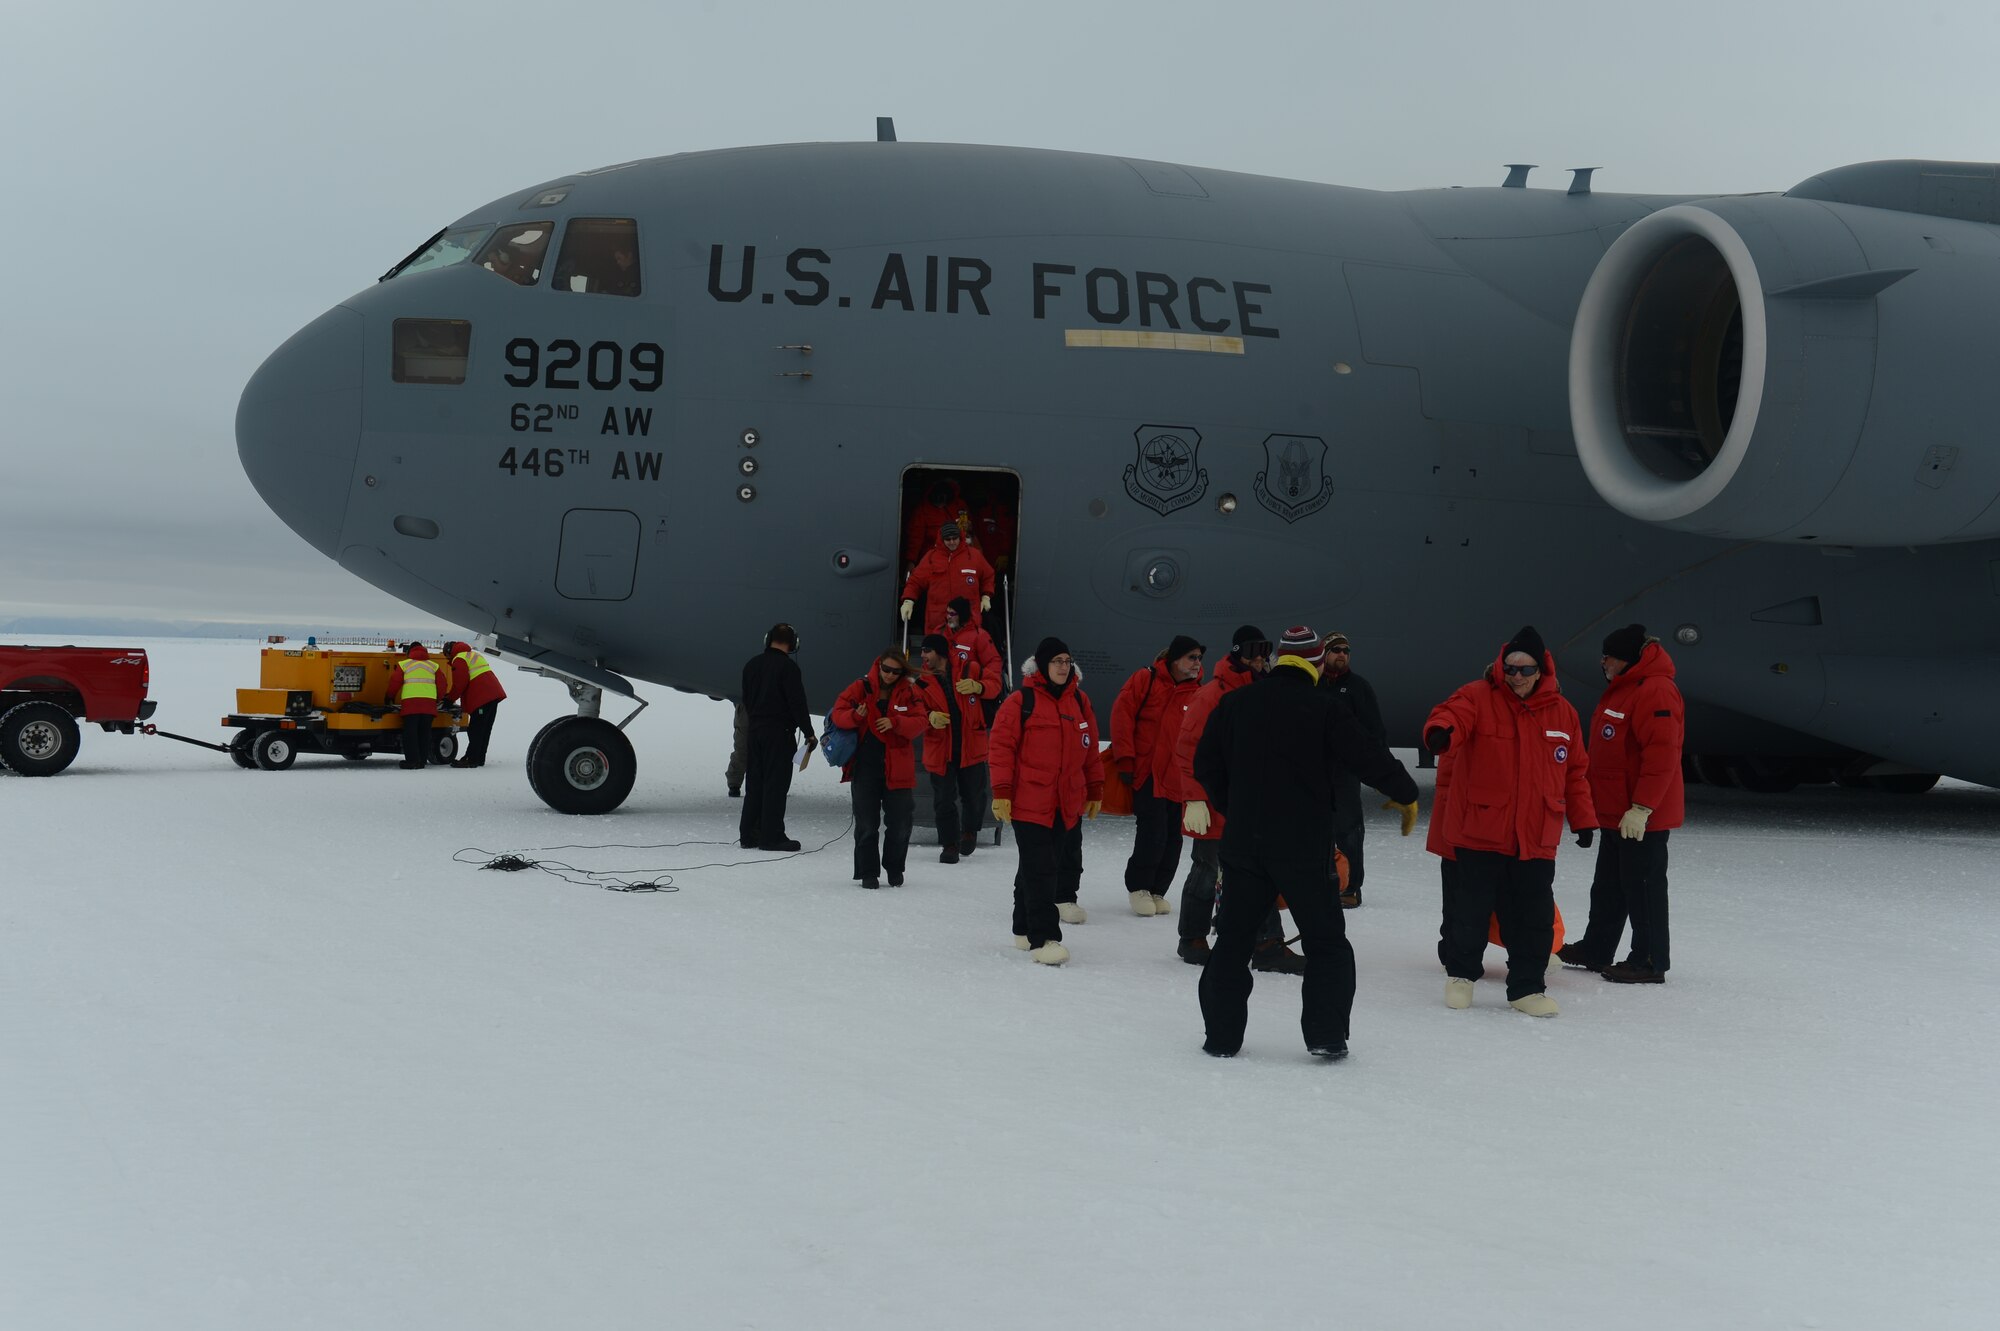 Passengers depart the C-17 Globemaster III aircraft, Oct. 8th, 2014 after landing at the Pegasus White Ice runway, part of McMurdo Station, Antarctica. More than 60 passengers were on board this flight which included a helicopter as part of the cargo. (U.S. Air Force photo/Master Sgt. Todd Wivell)